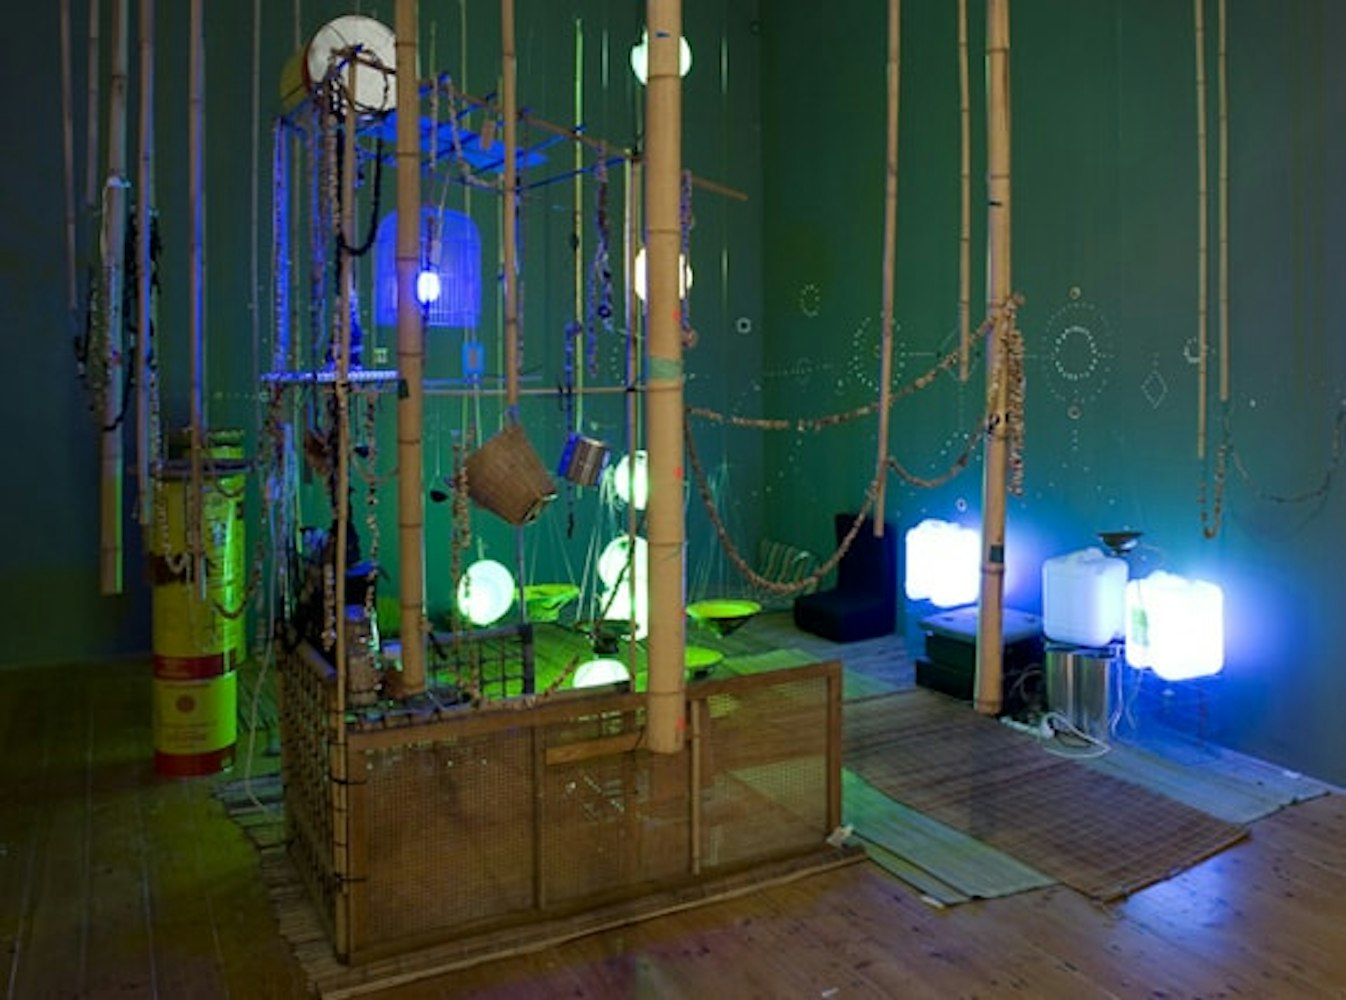 Bellowing Echoes, 2012, installation at Gertrude Contemporary.